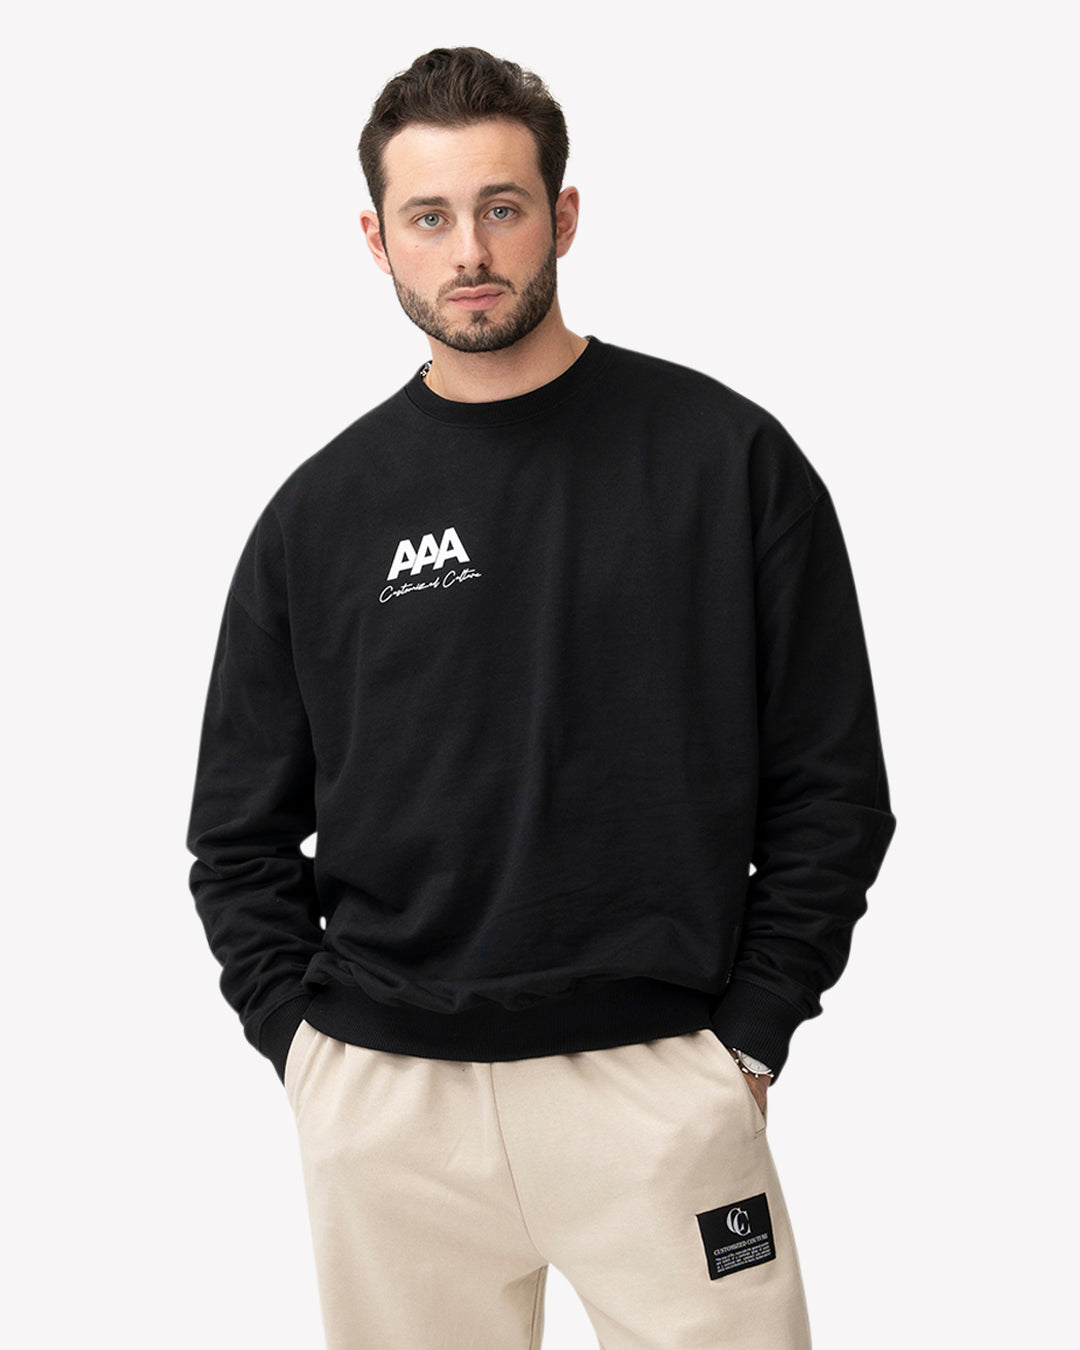 Access All Areas Sweater Black | Customized Culture